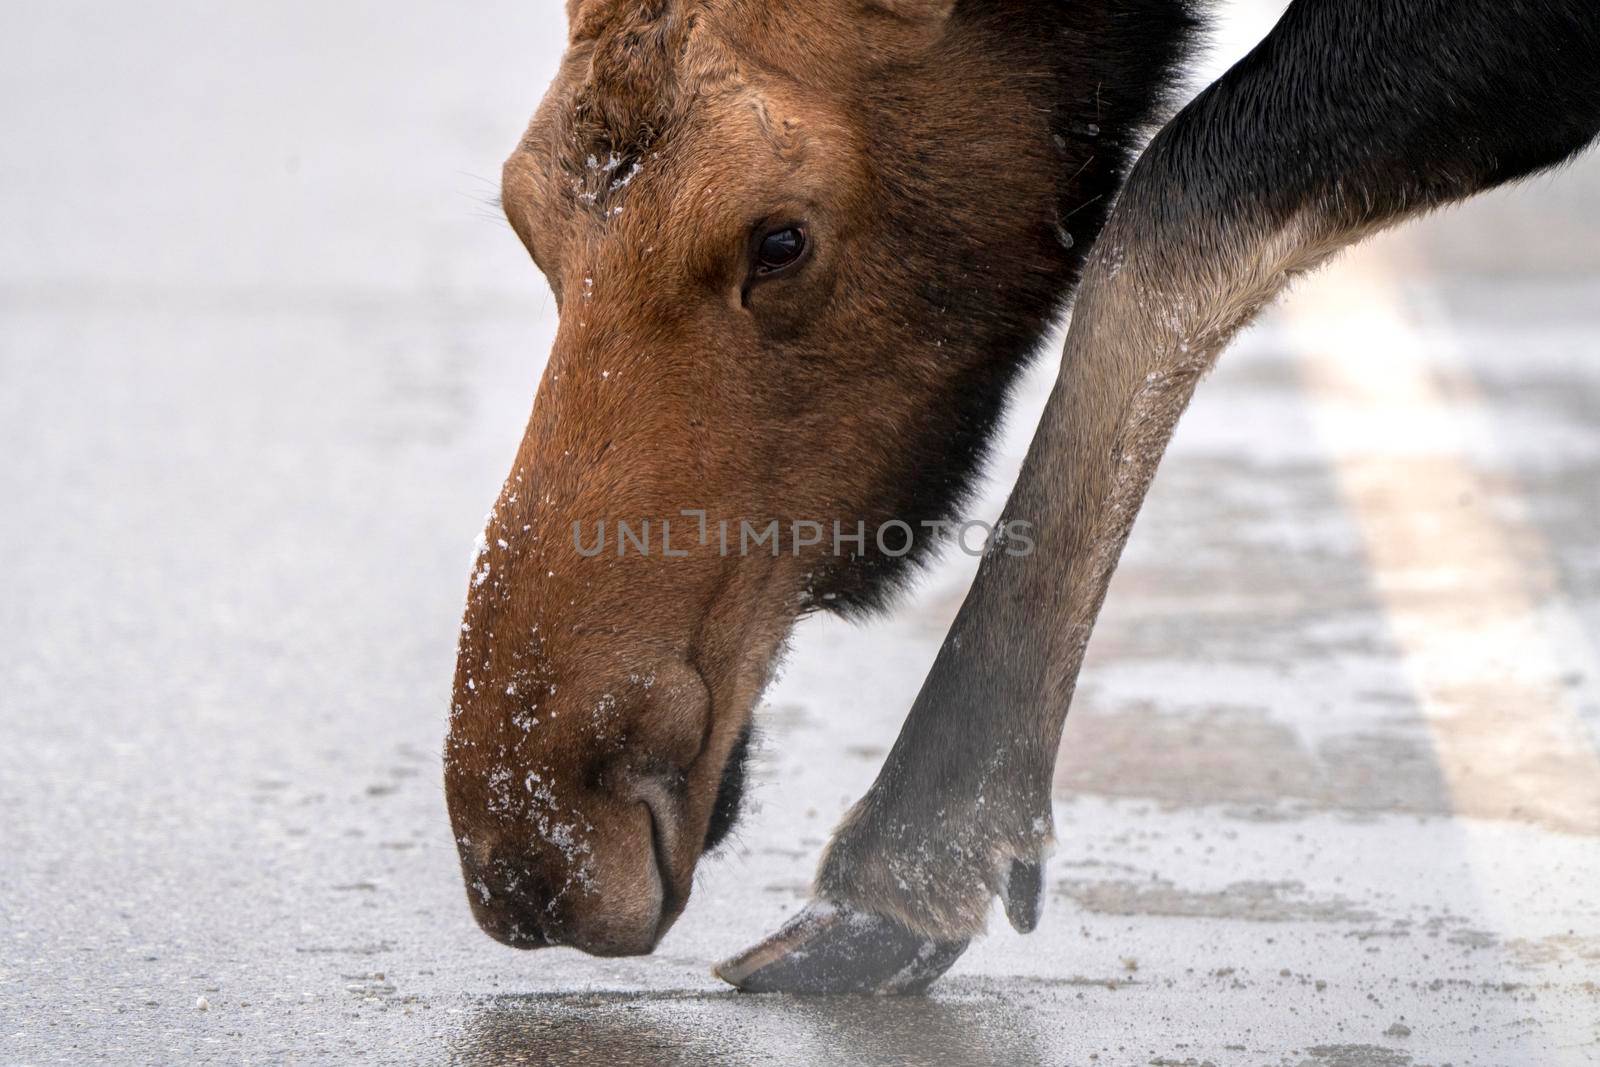 Winter Moose Manitoba by pictureguy